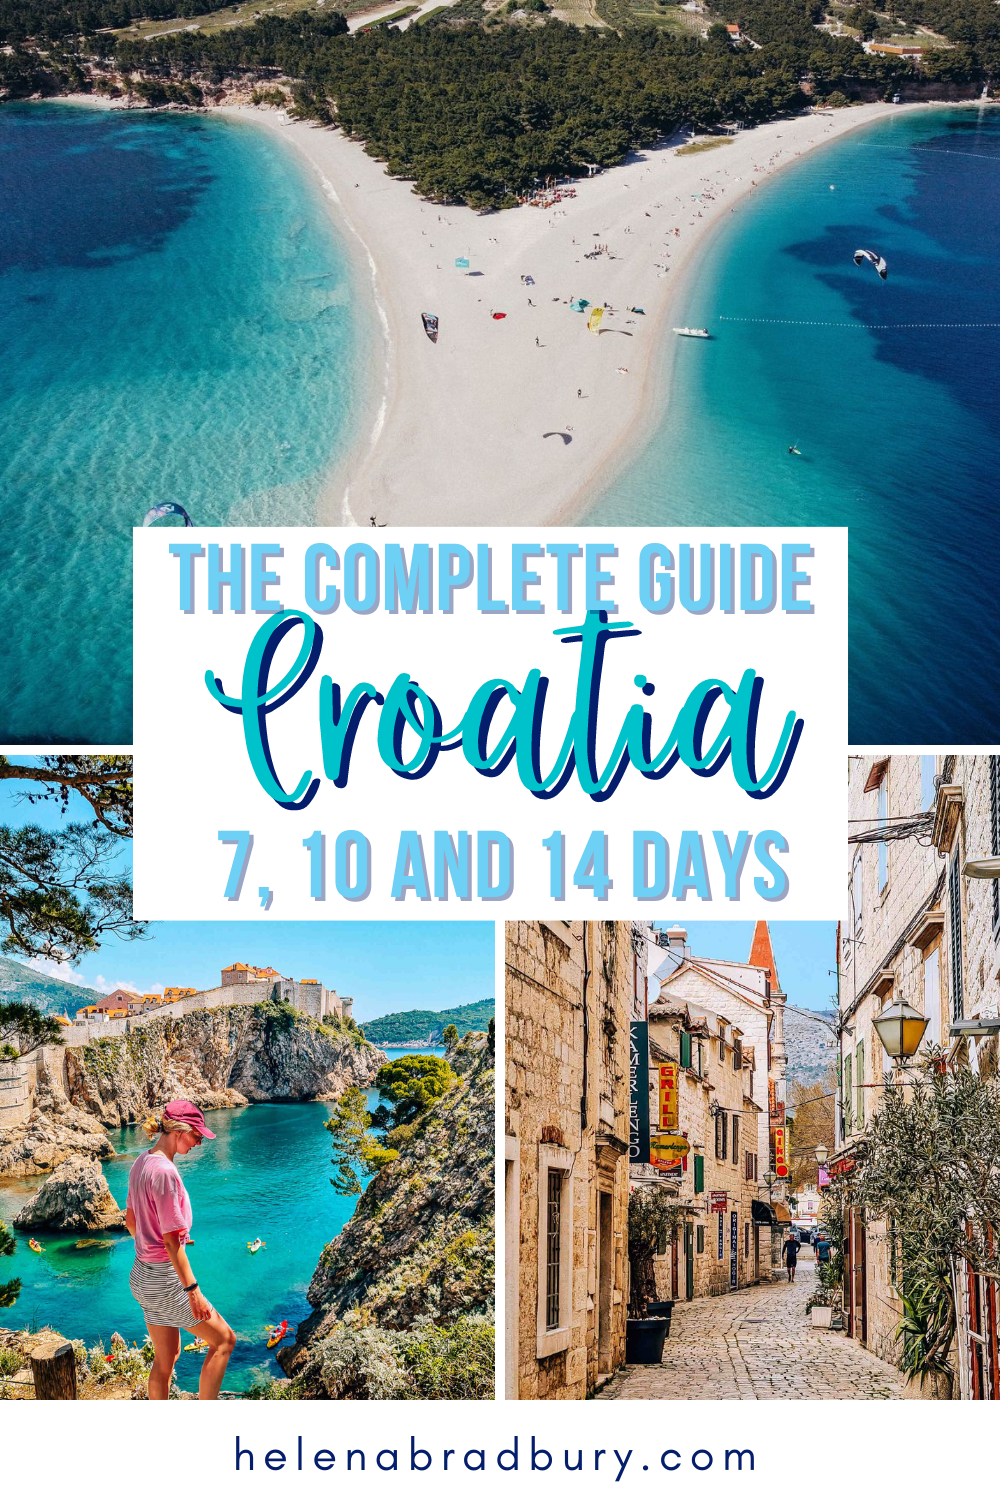 Plan the perfect trip to Croatia with this 7 day Croatia itinerary exploring the most famous places to see in Croatia (by someone who lives here). With additional itineraries for 10 days and 14 days in Croatia. | croatia 7 day itinerary | croatia 7 d